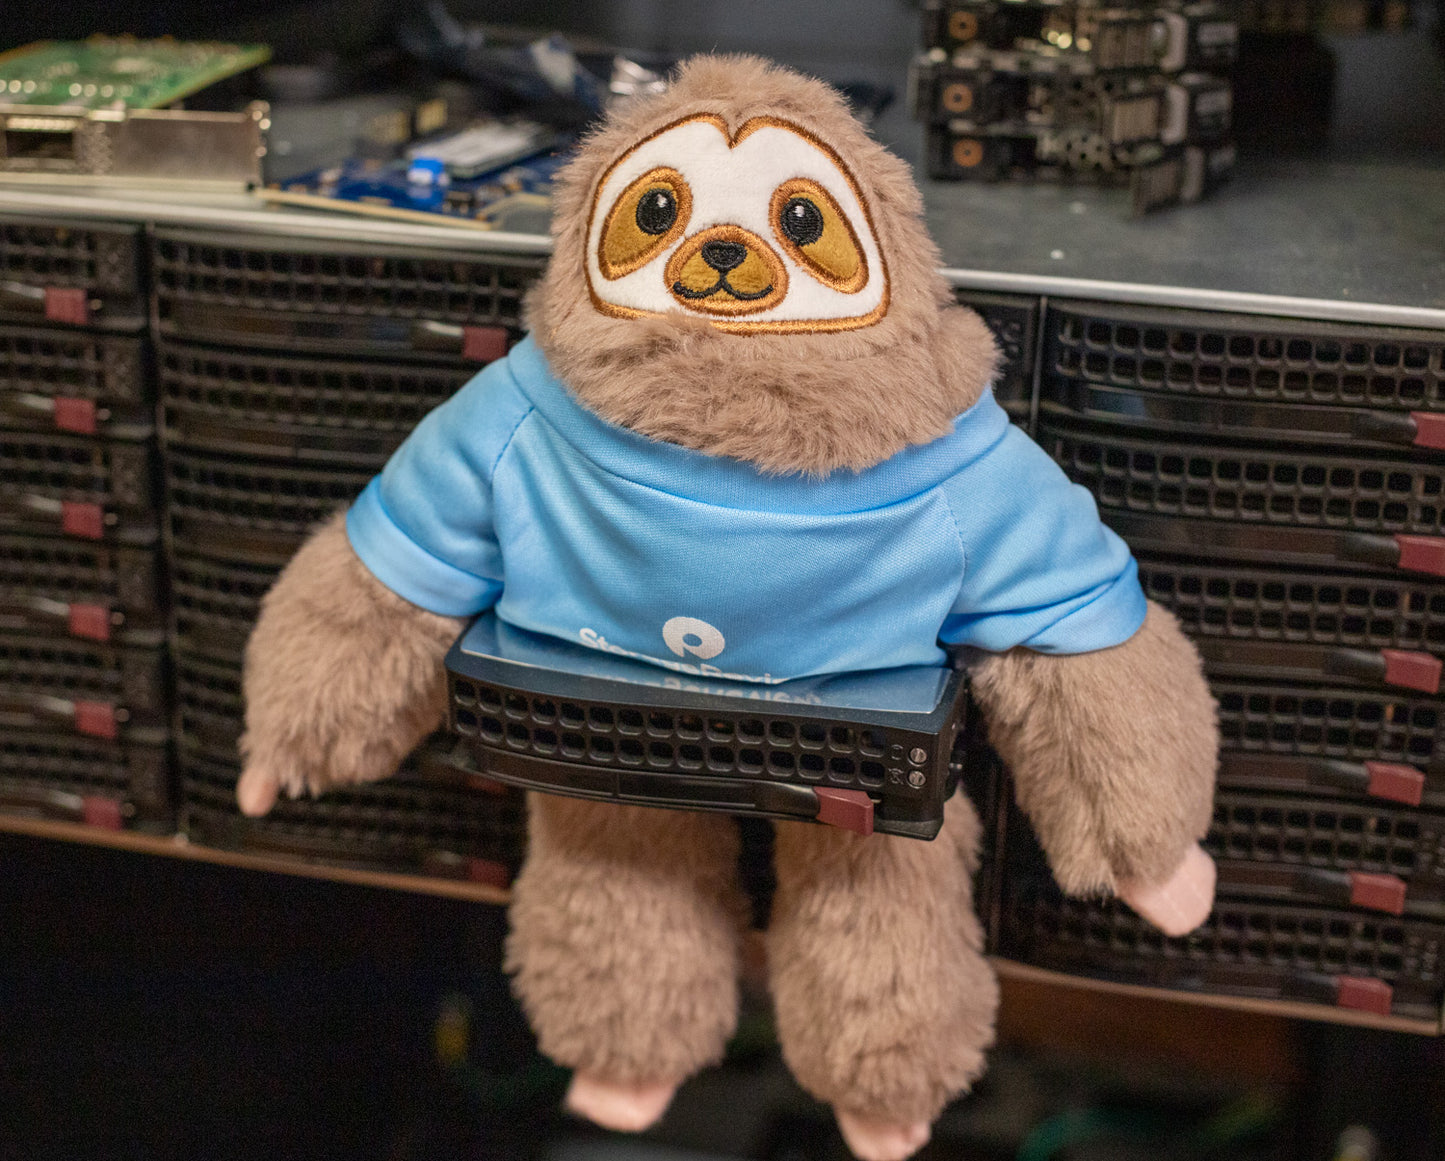 Official Signed StorageReview Sloth